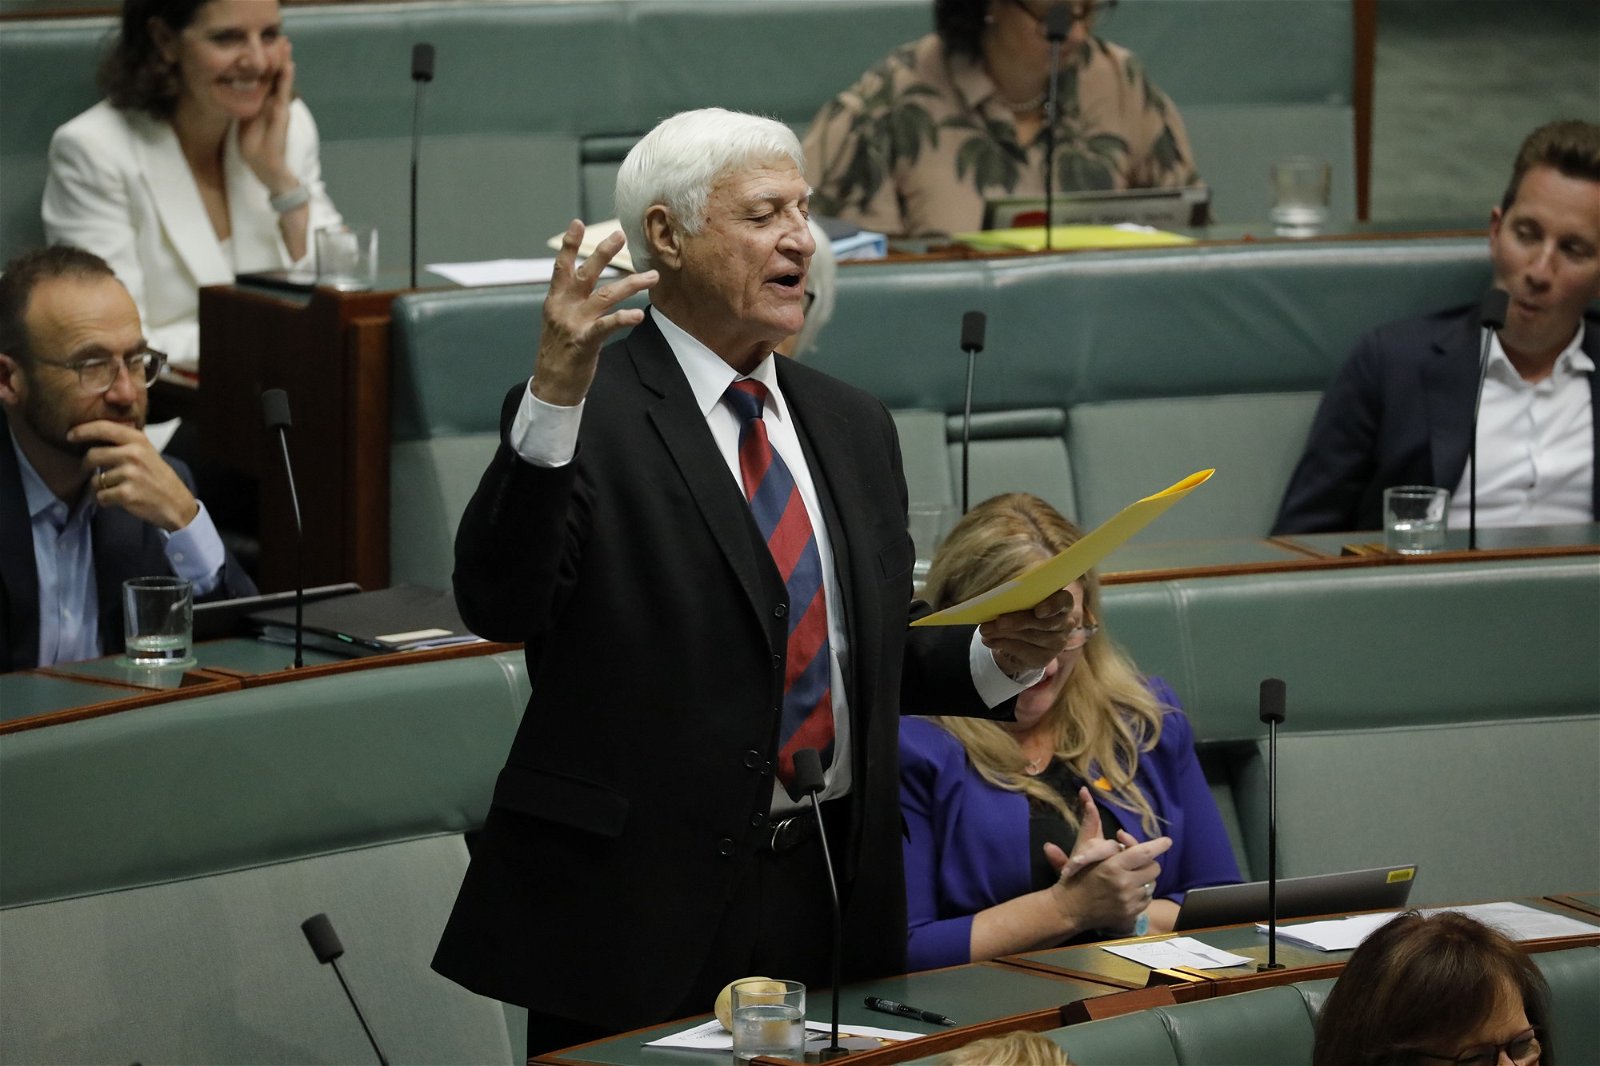 An older man in a suit delivers a speech with flare in parliament.